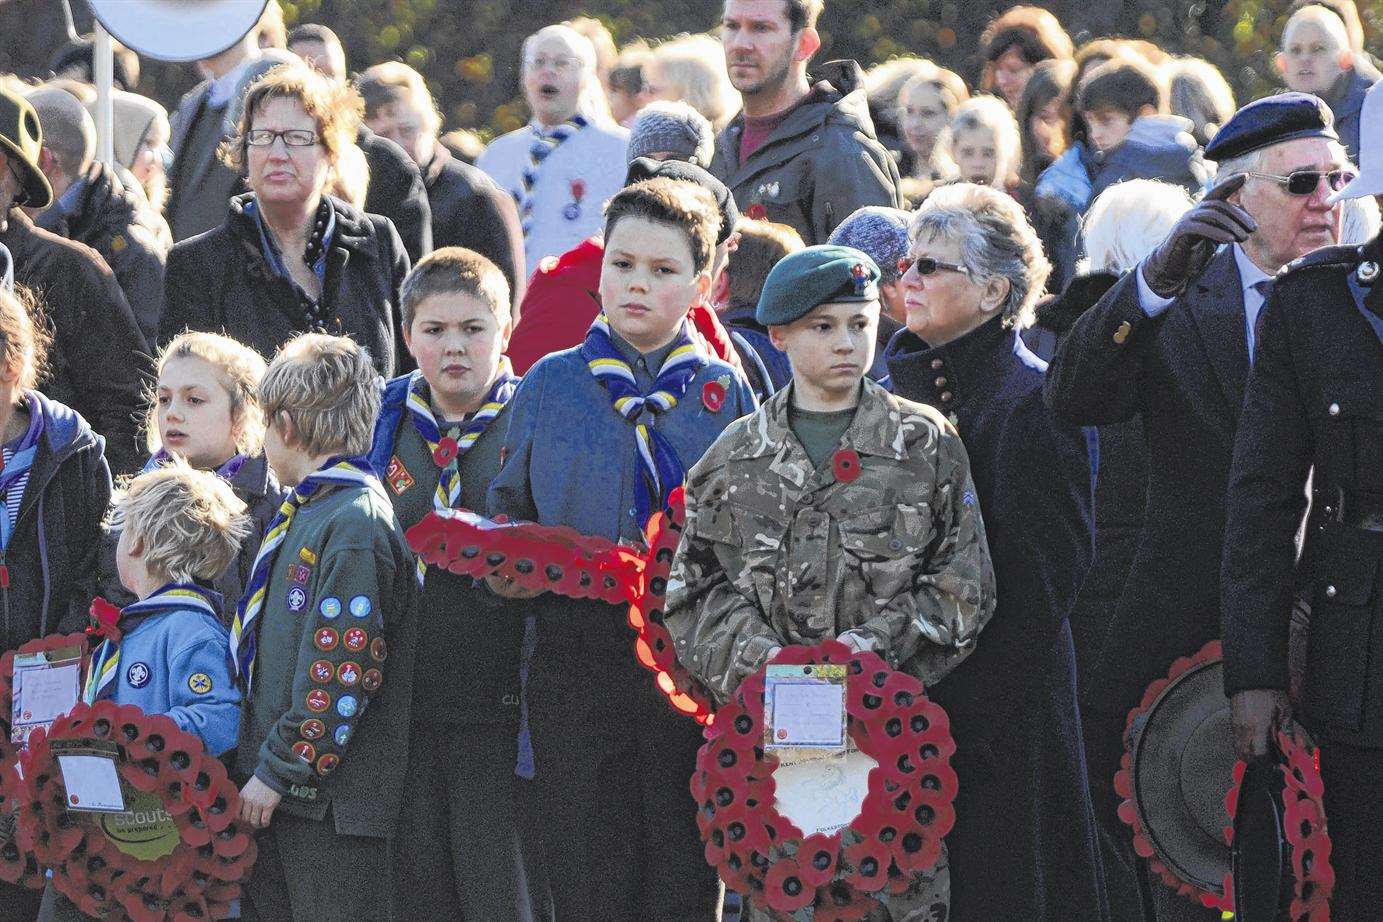 A scene from last year's Remembrance ceremony at Hythe.